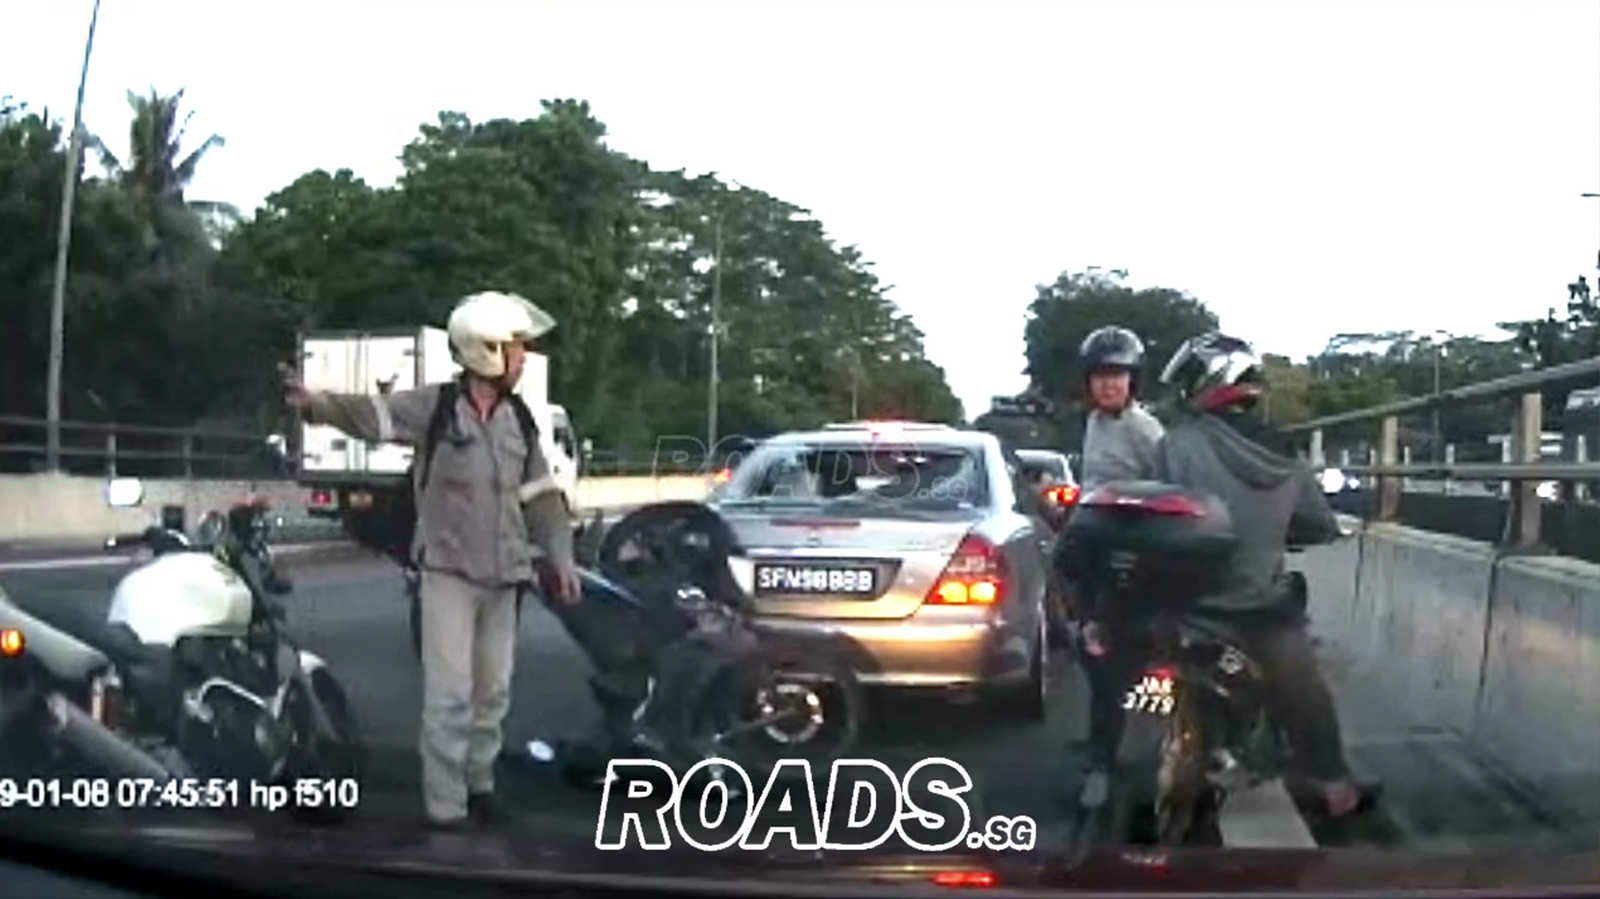 Motorists rush to help injured motorcyclist after chain collision along SLE